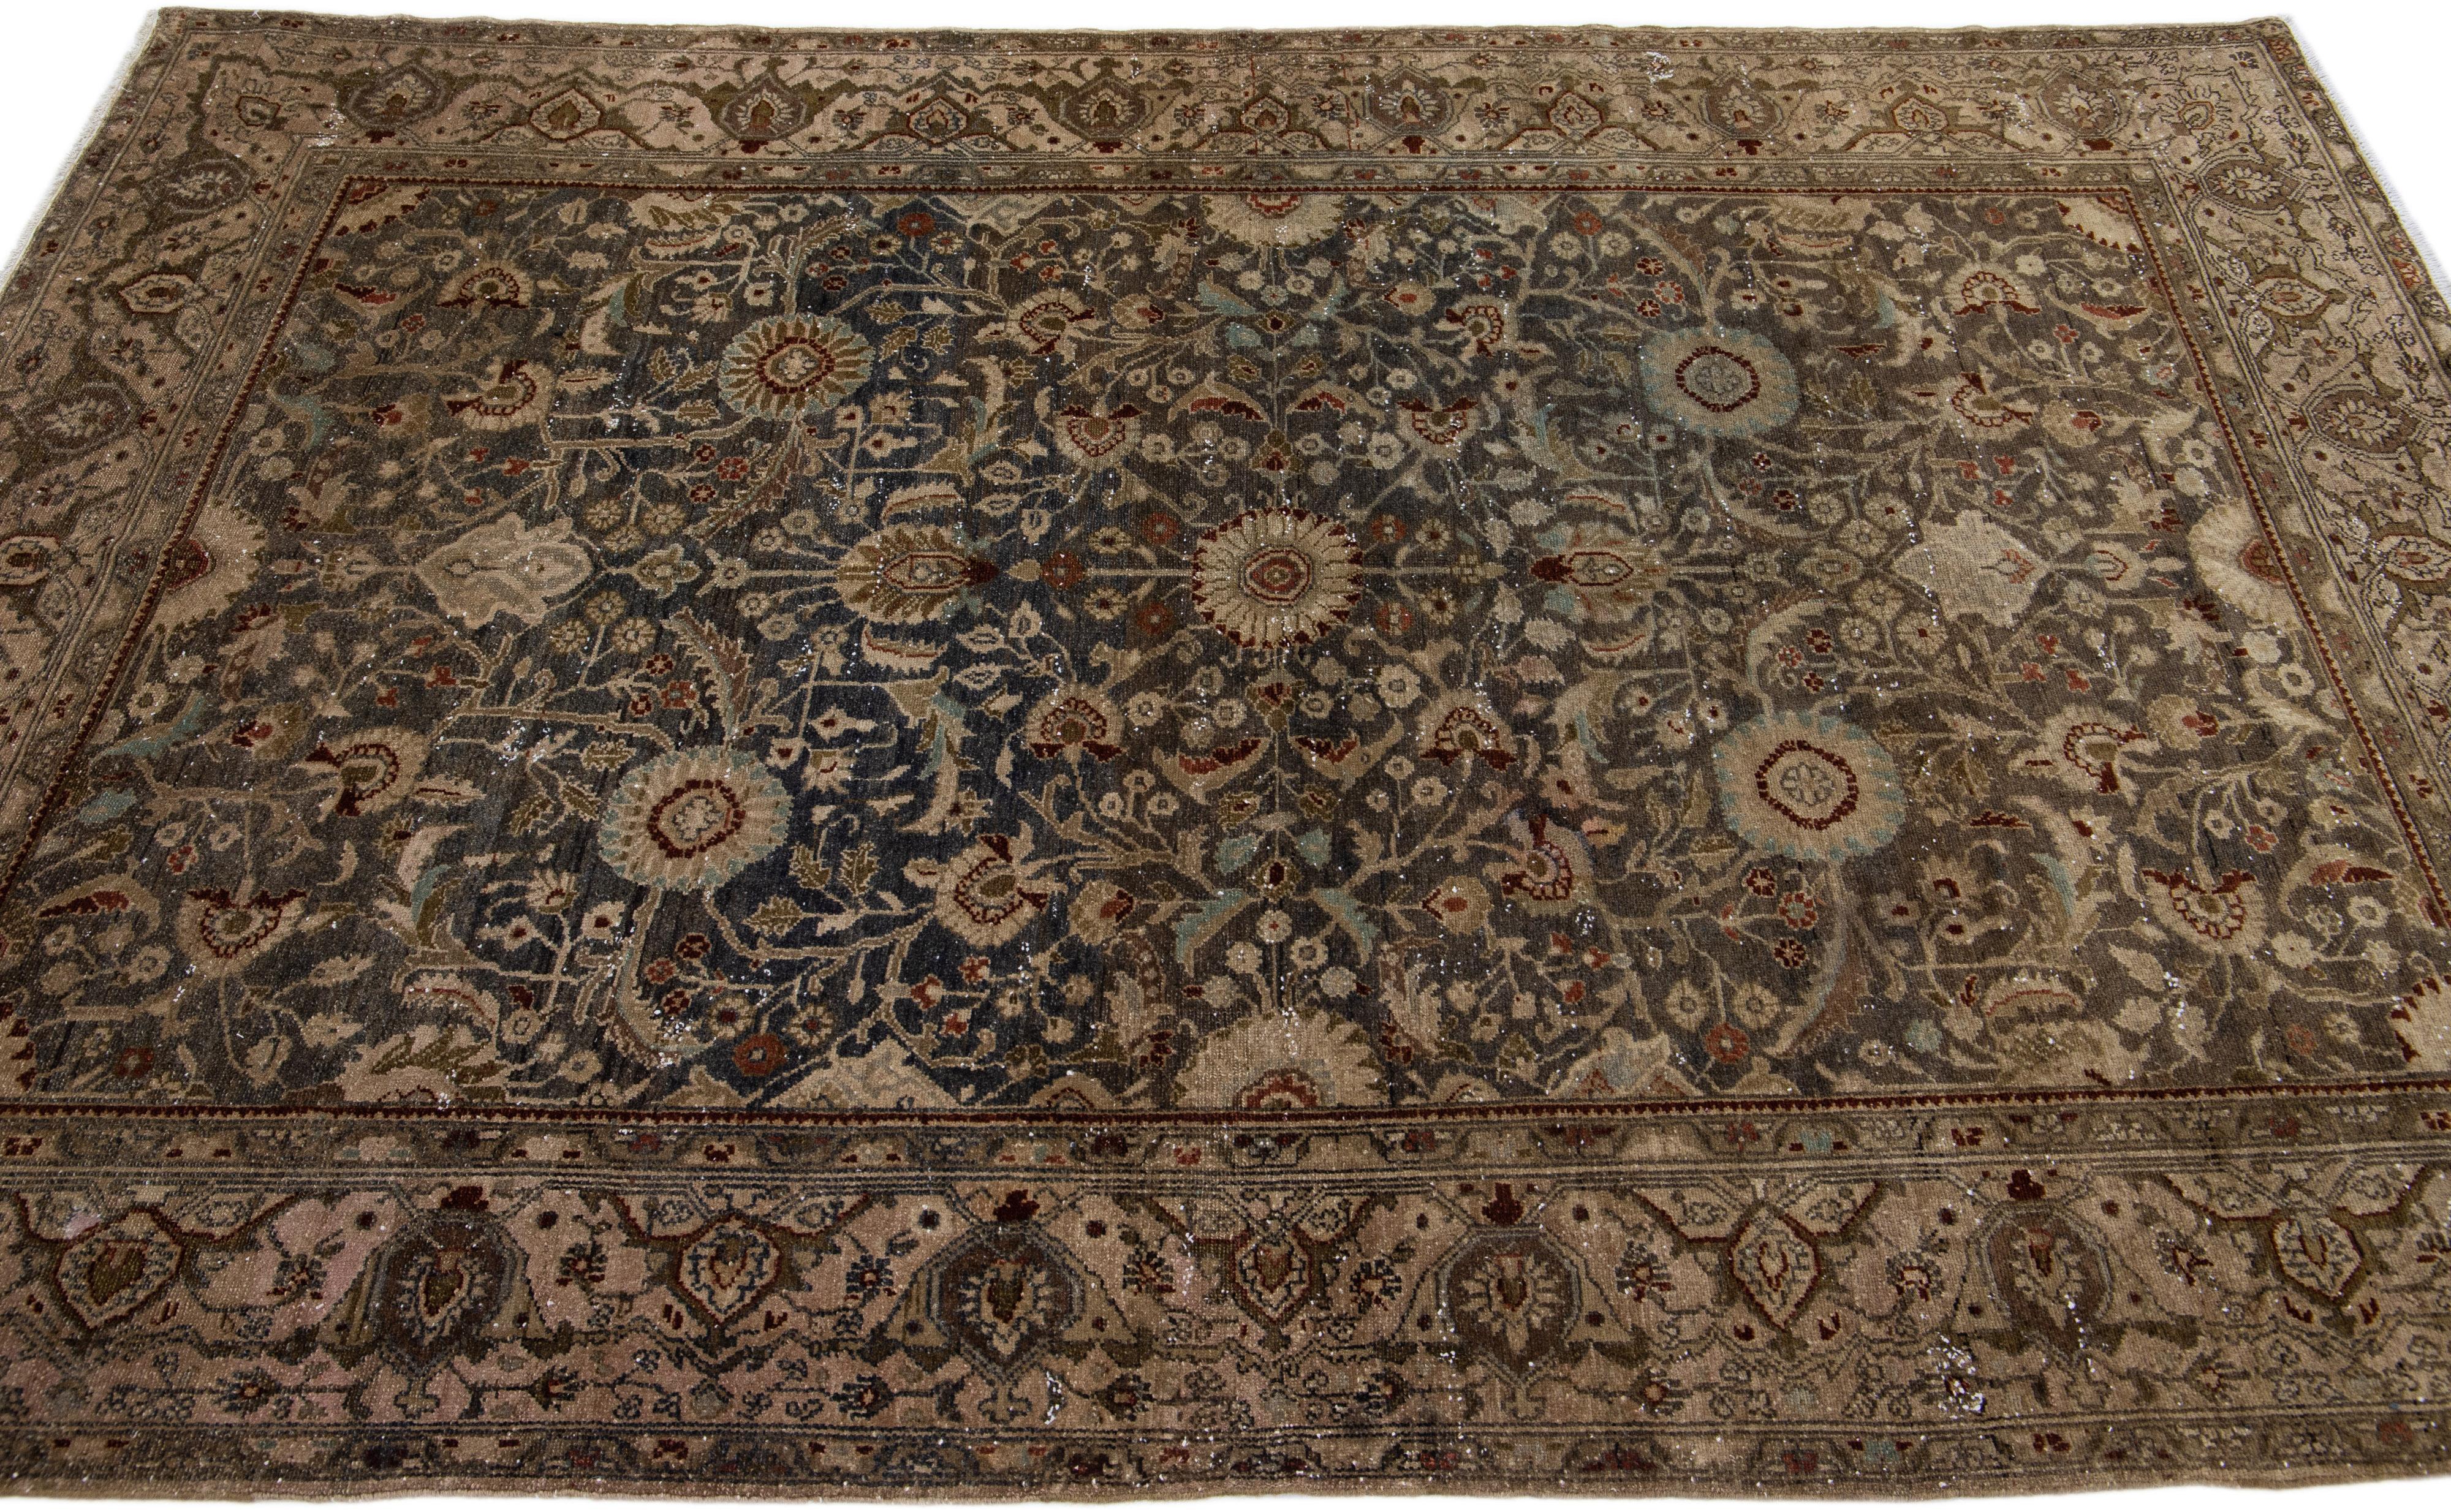 Antique Persian Malayer Blue Wool Rug with Medallion Floral Design In Good Condition For Sale In Norwalk, CT